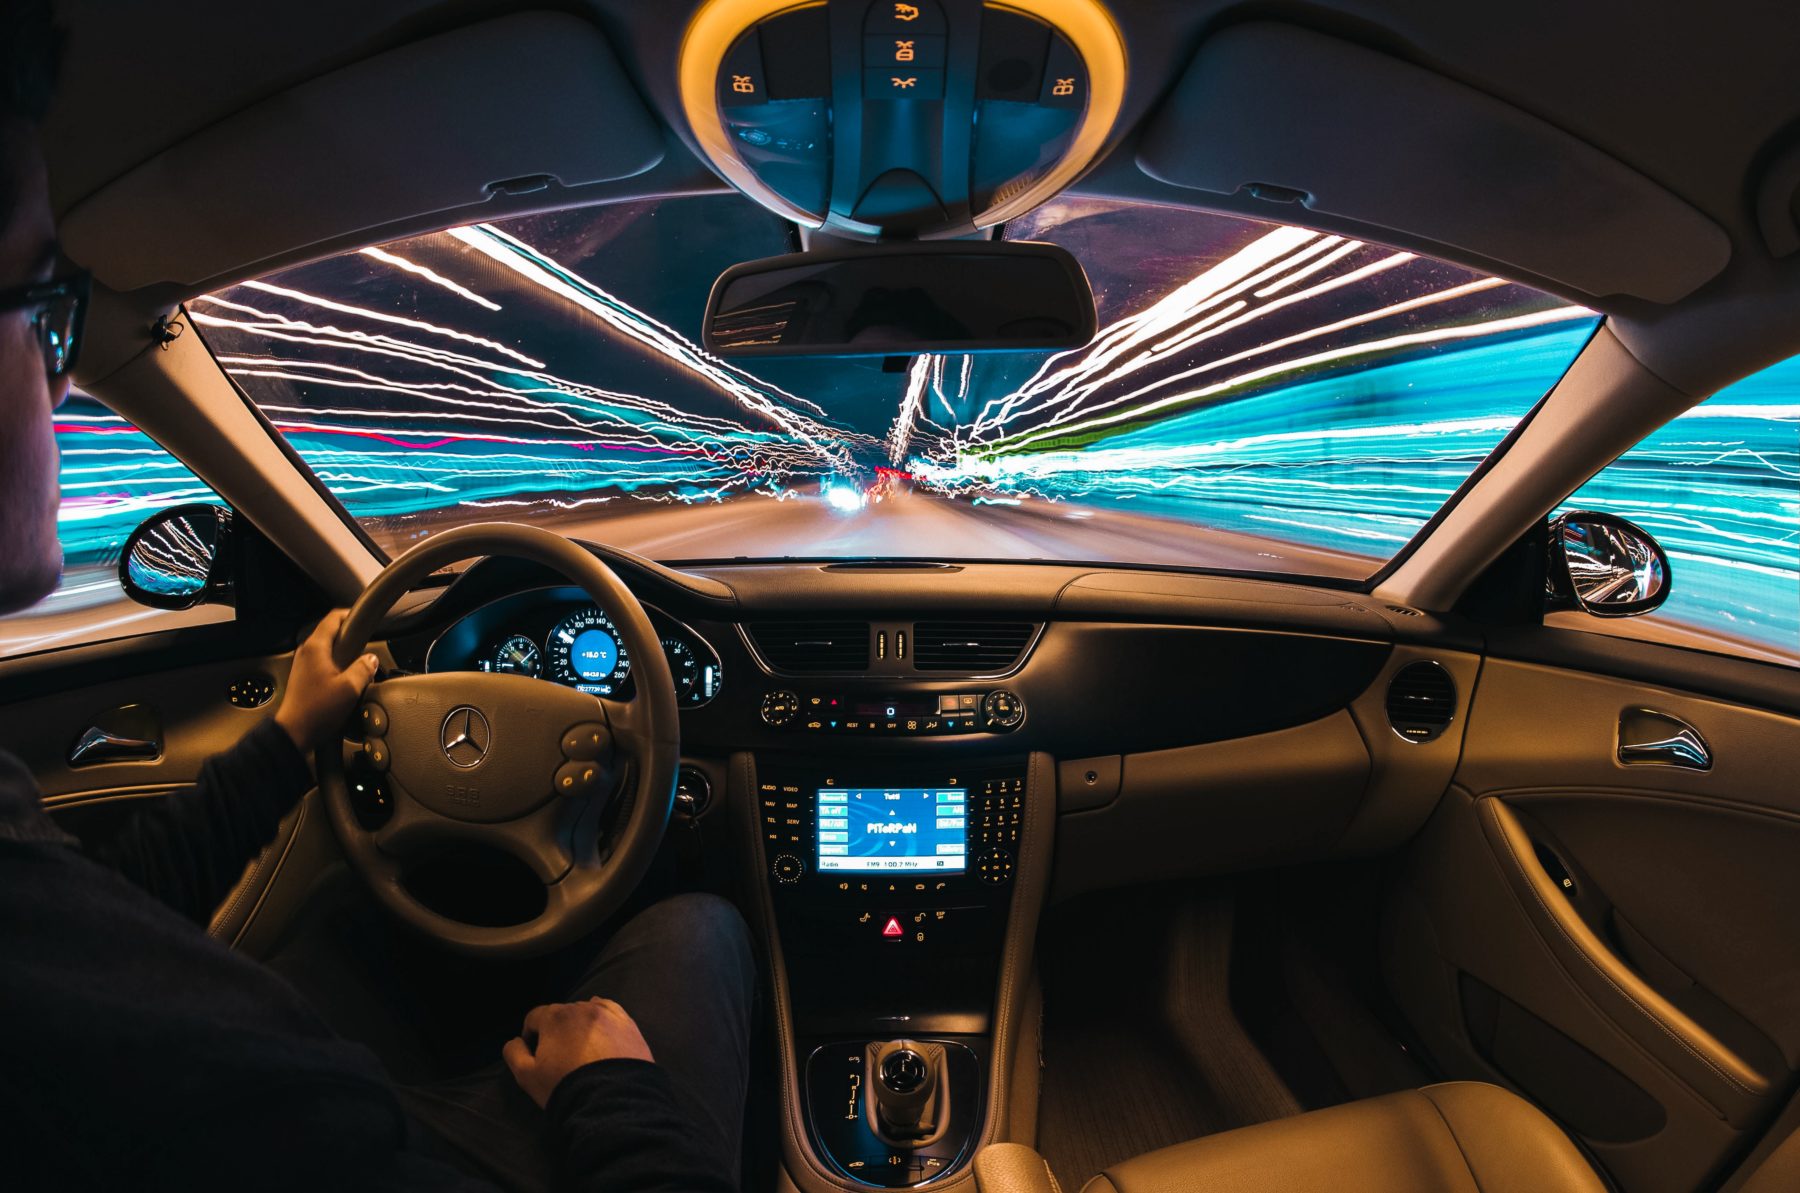 A man driving a car with long exposure lights going past in the windows.